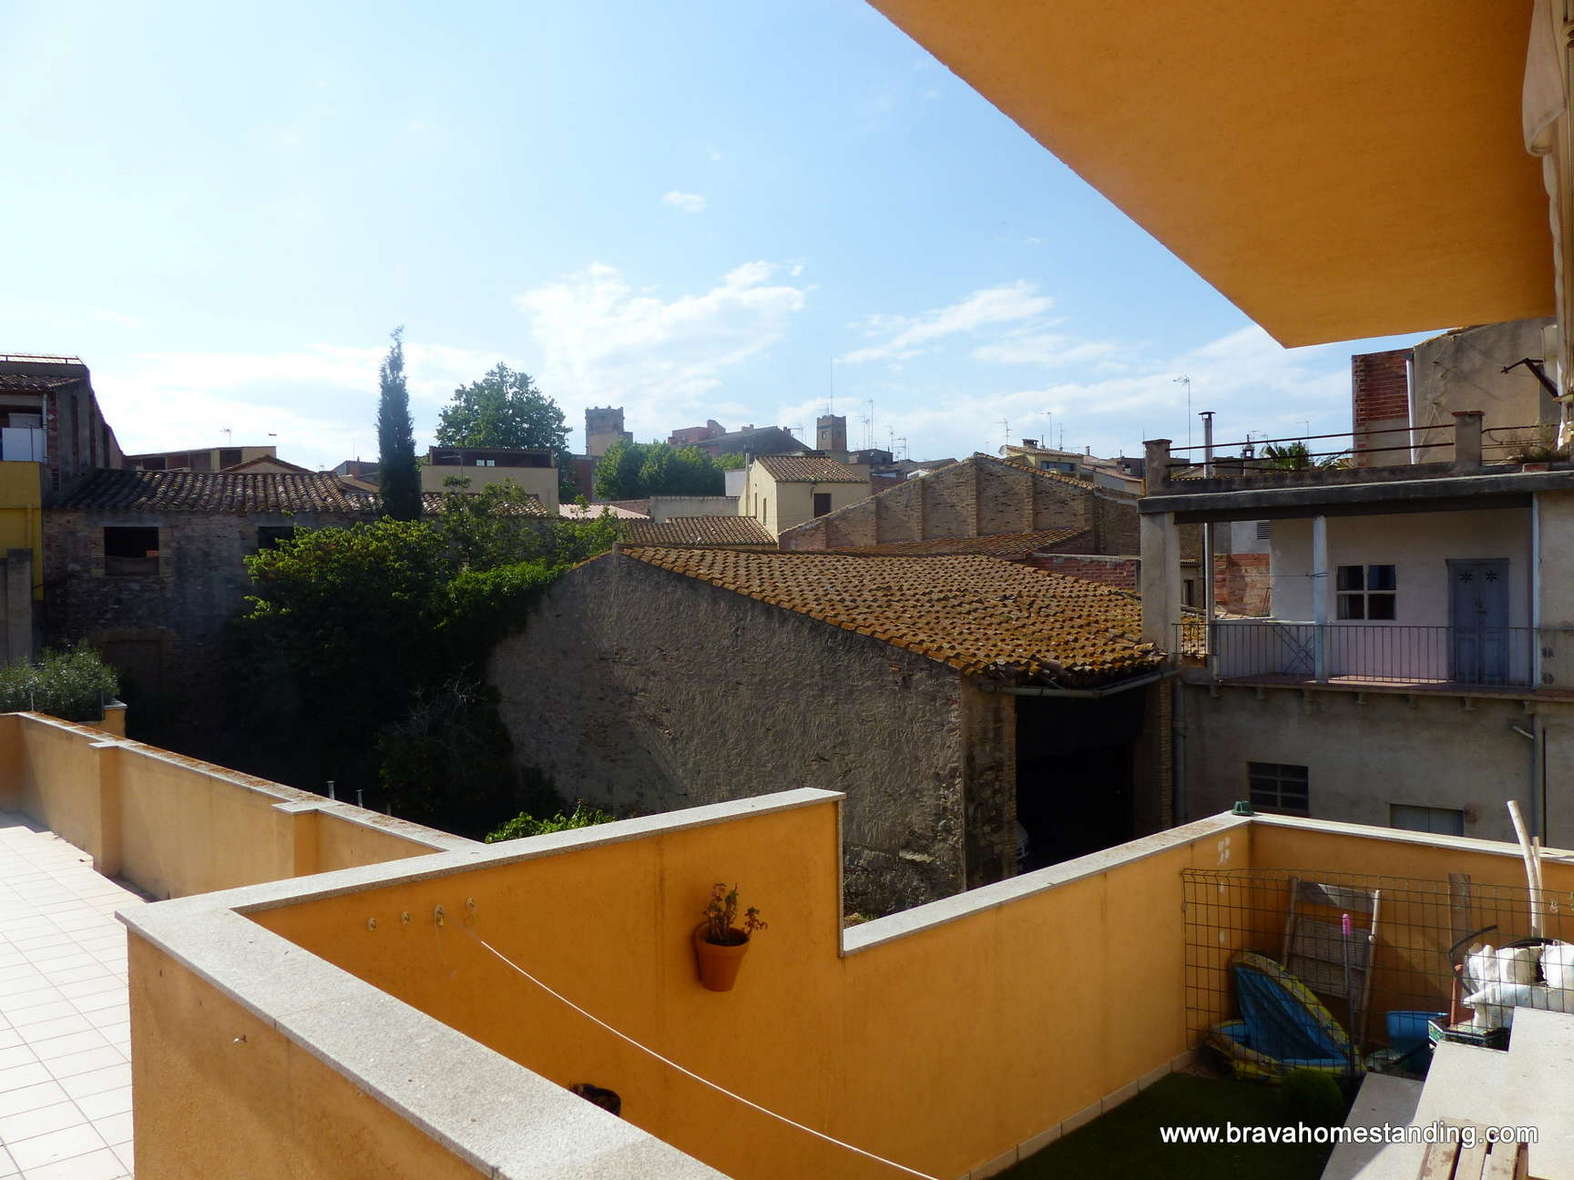 NICE RECENT APARTMENT FOR SALE IN CASTELLO D'EMPURIES